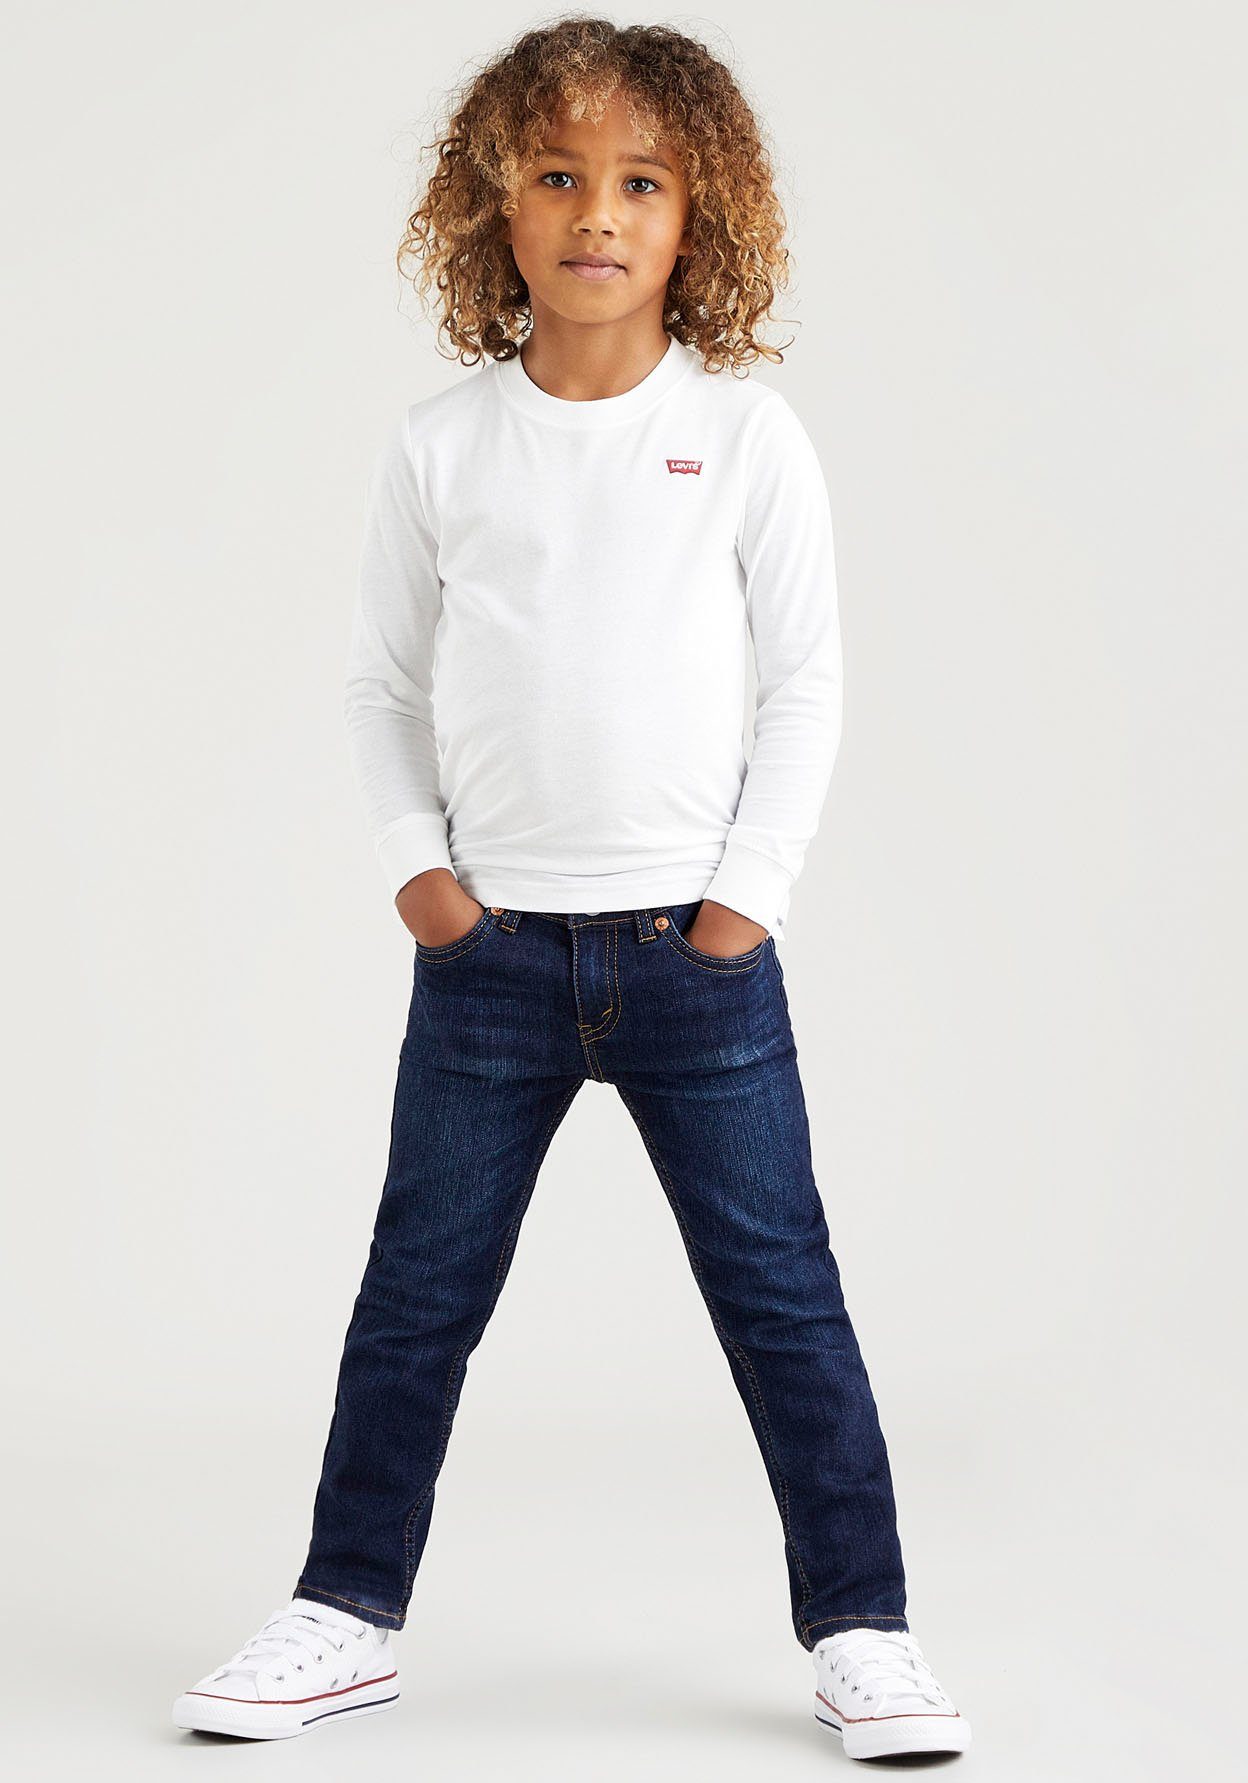 for BATWING Langarmshirt Kids weiß BOYS TEE CHESTHIT L/S Levi's®